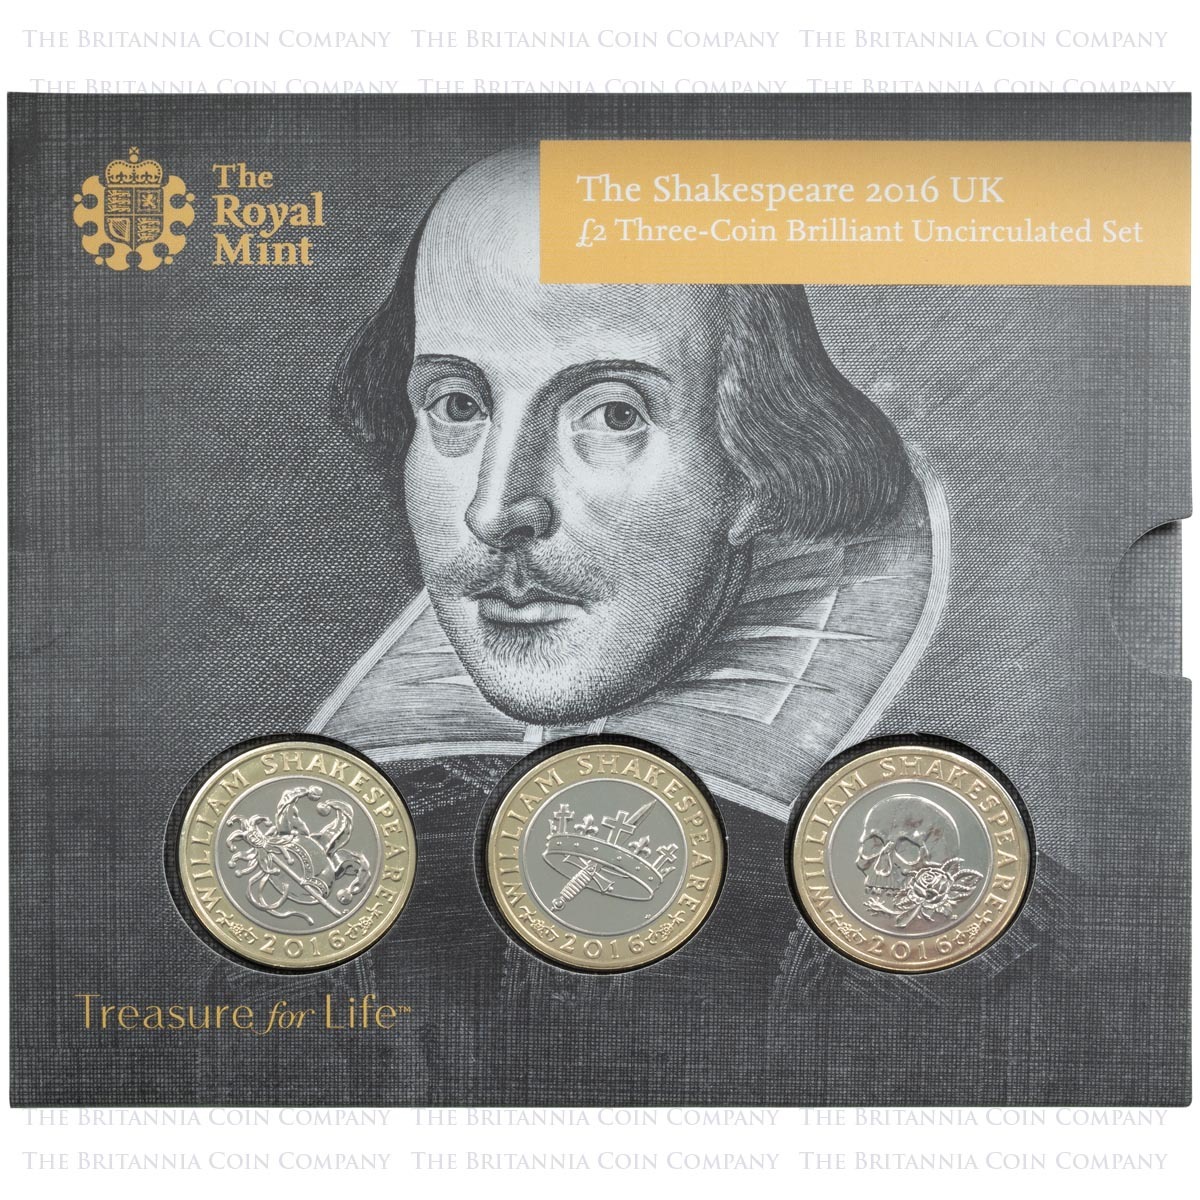 uk16s3bu-2016-william-shakespeare-comedy-tragedy-history-brilliant-uncirculated-two-pound-three-coin-set-007-m